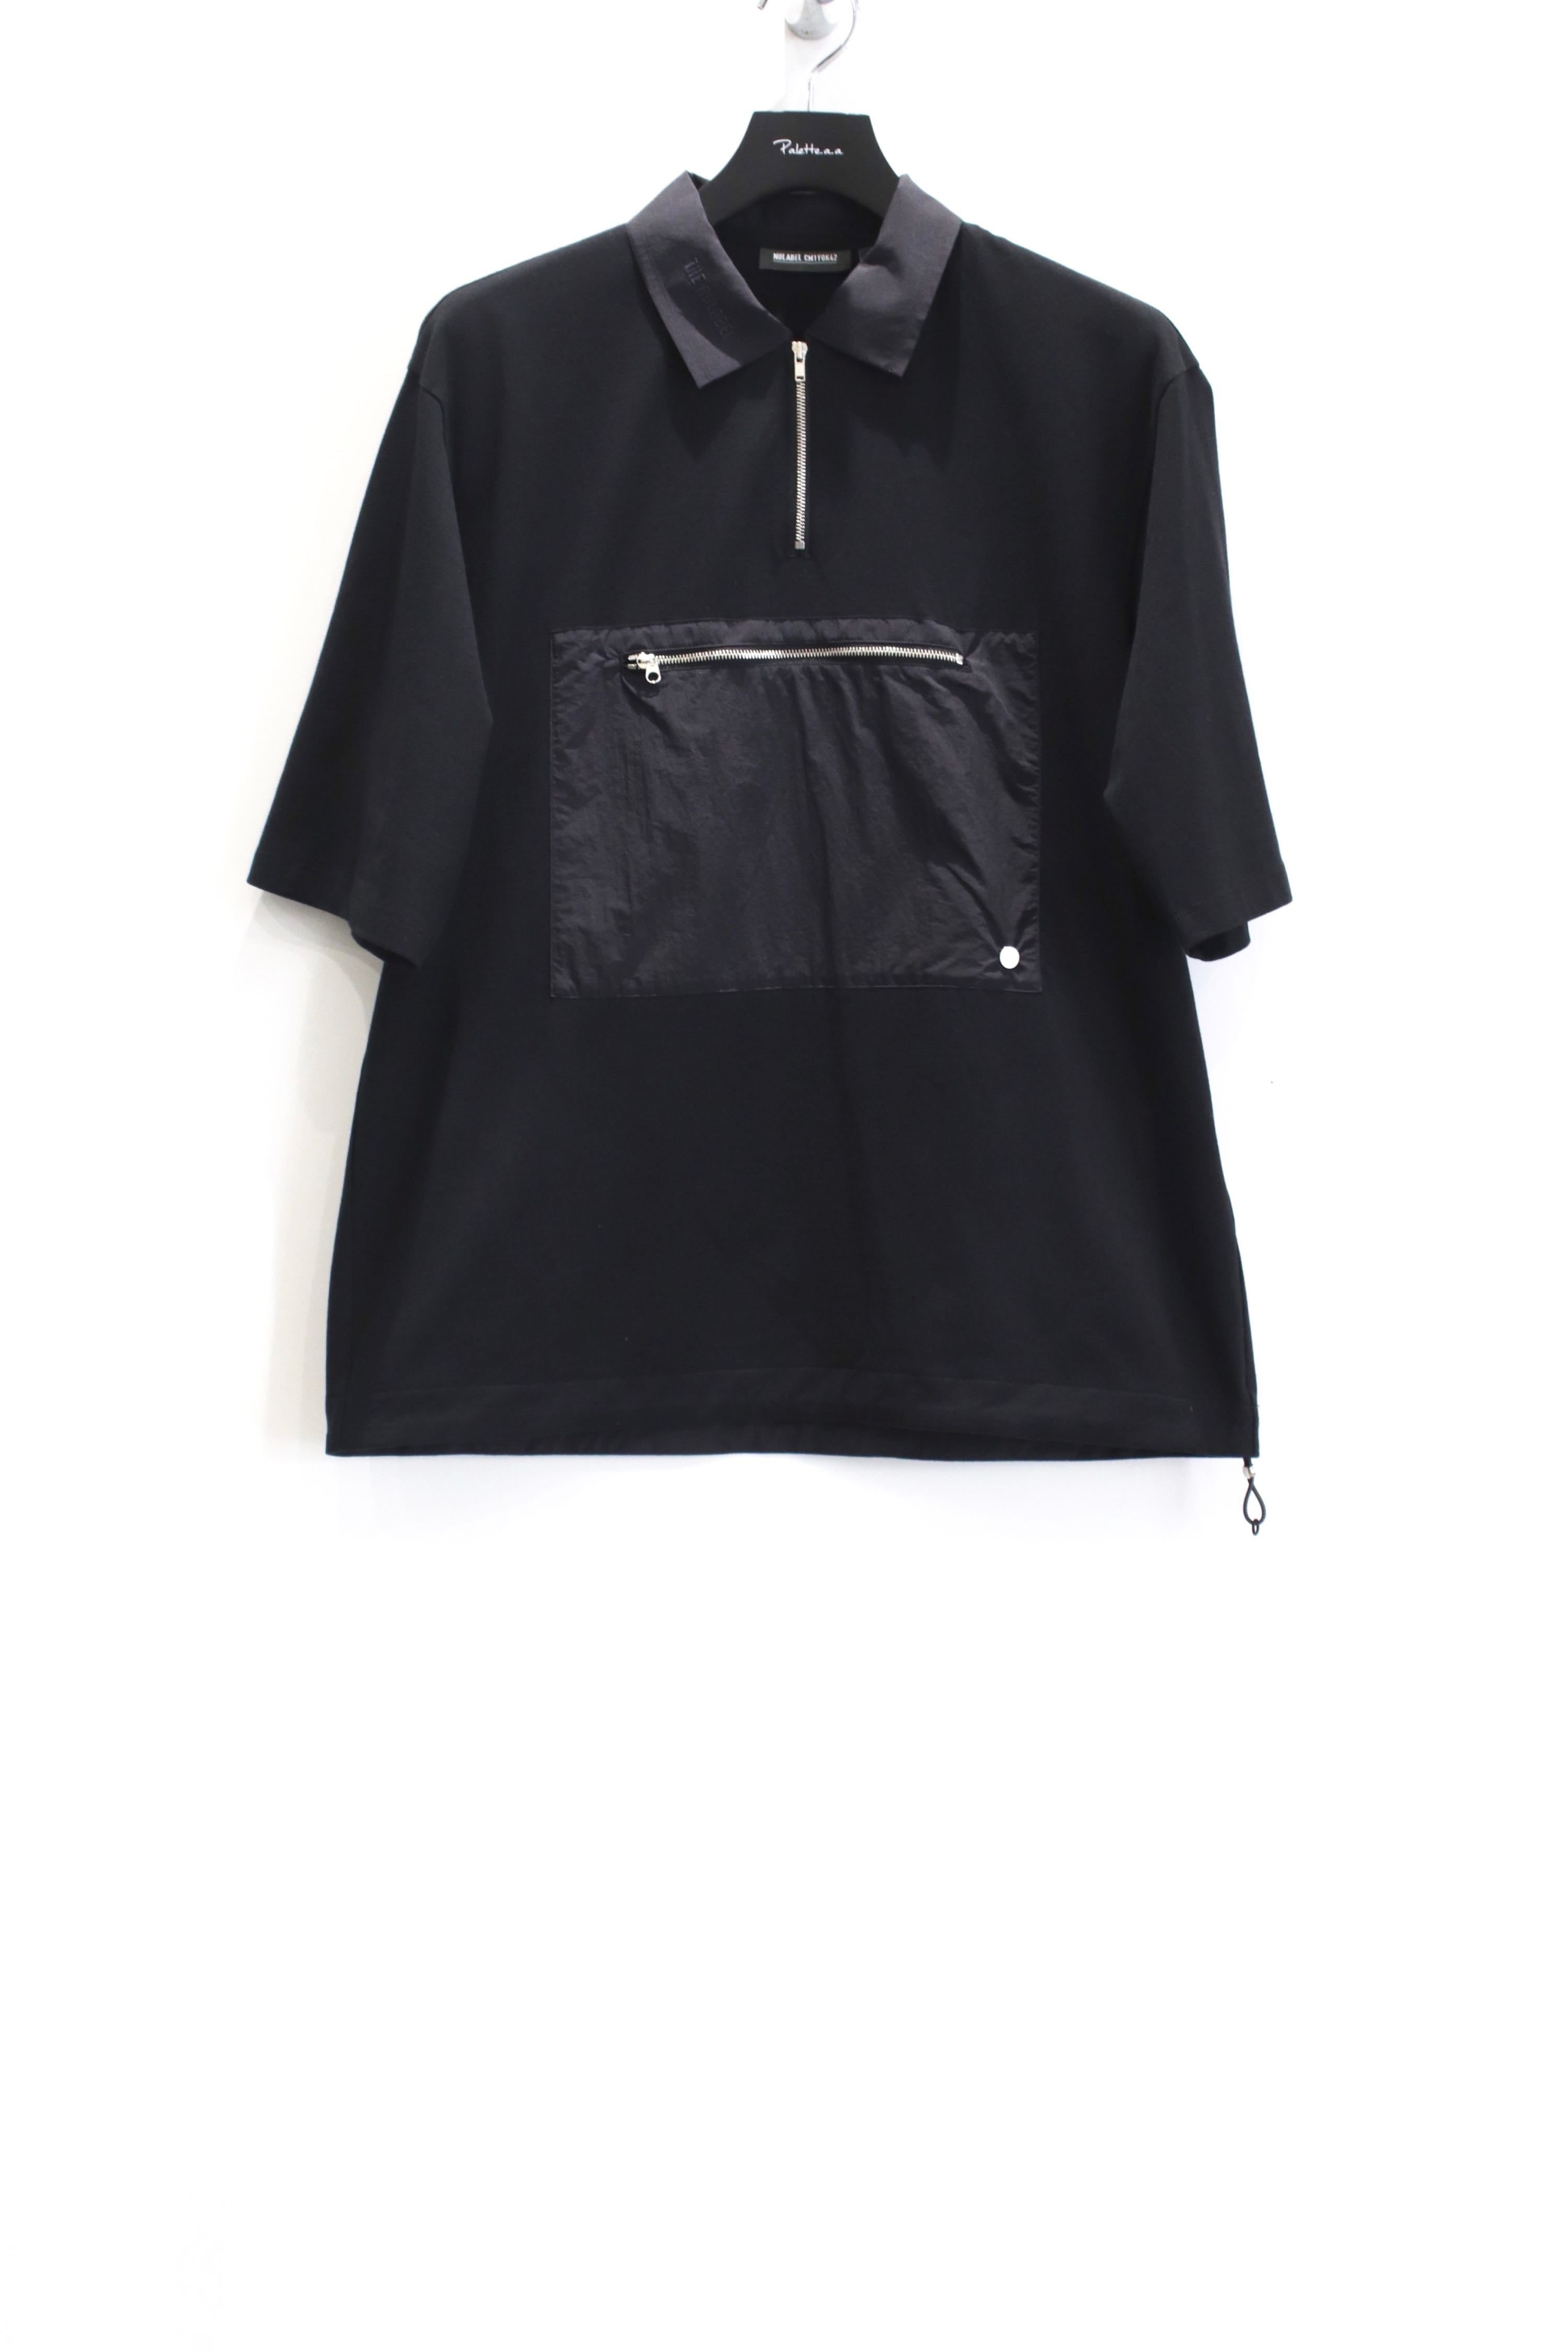 Nulabel's Zip Polo S/S (Polo Shirt) Mail Order | Palette Art Alive